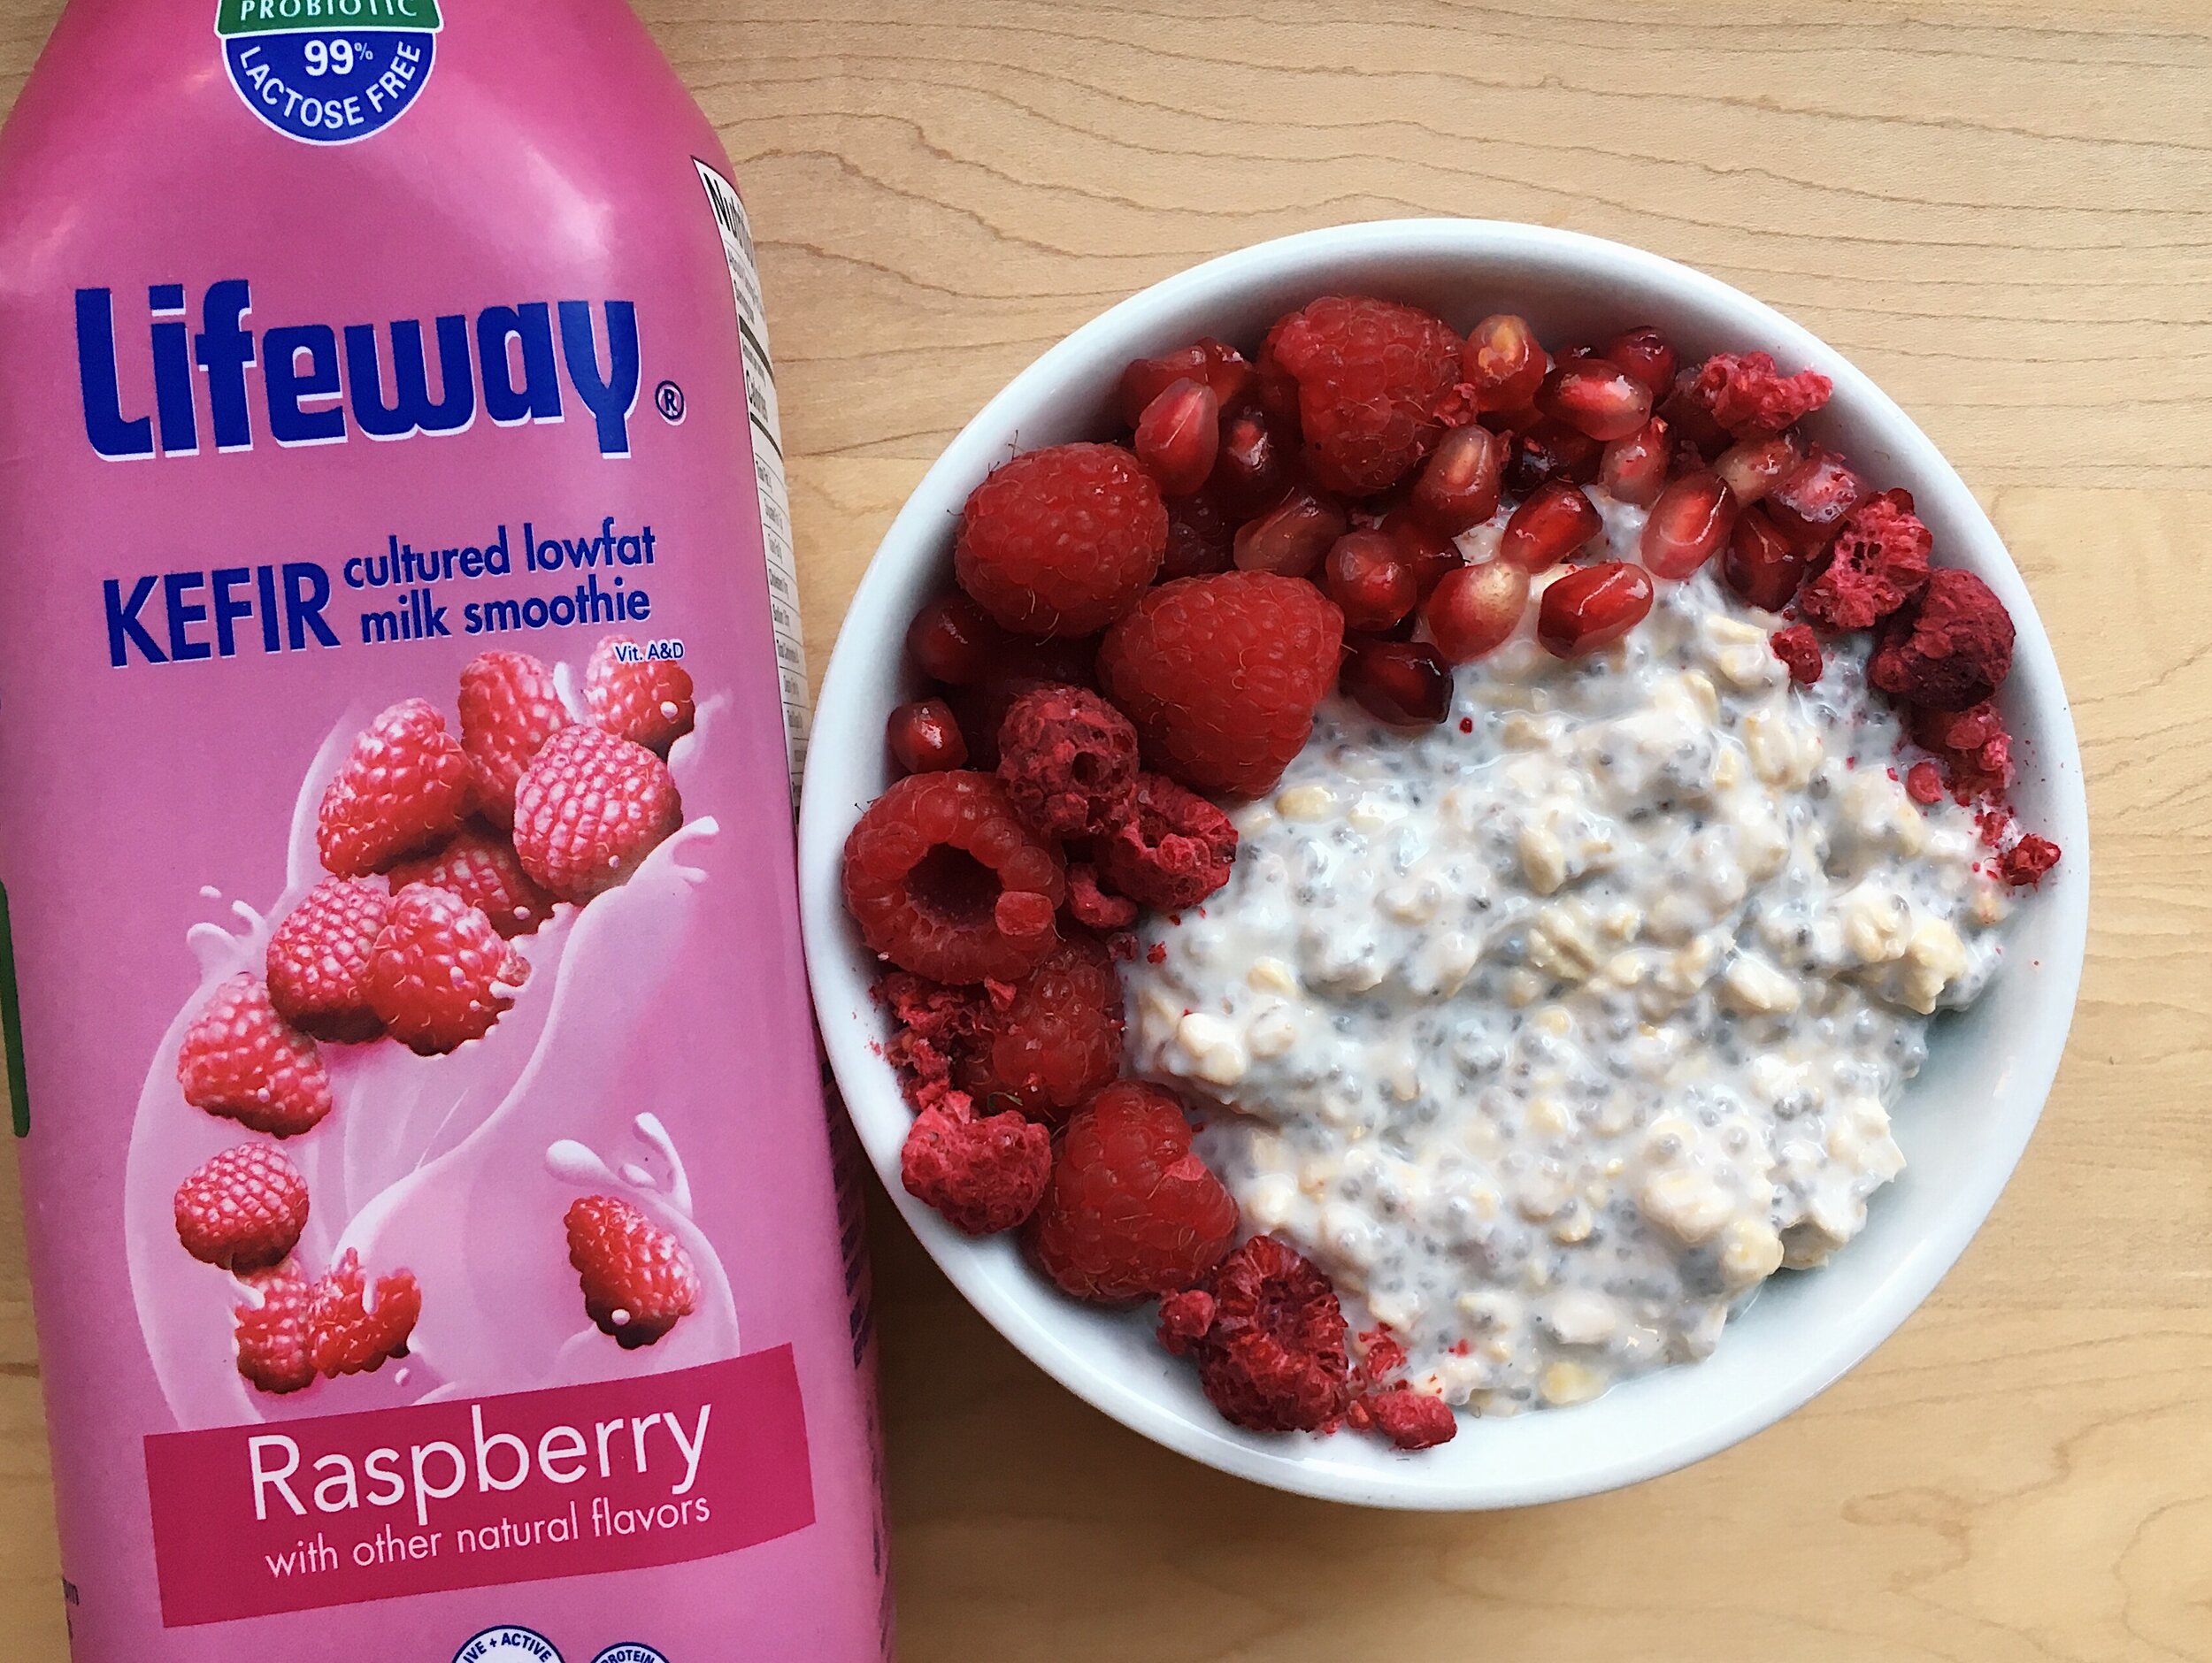 https://images.squarespace-cdn.com/content/v1/599f68189f8dce679f3ed937/1579727169470-0WJL9NU4MKWI4MGFMWYX/lifeway+overnight+oats+raspberry+with+product+4x3.jpg?format=2500w